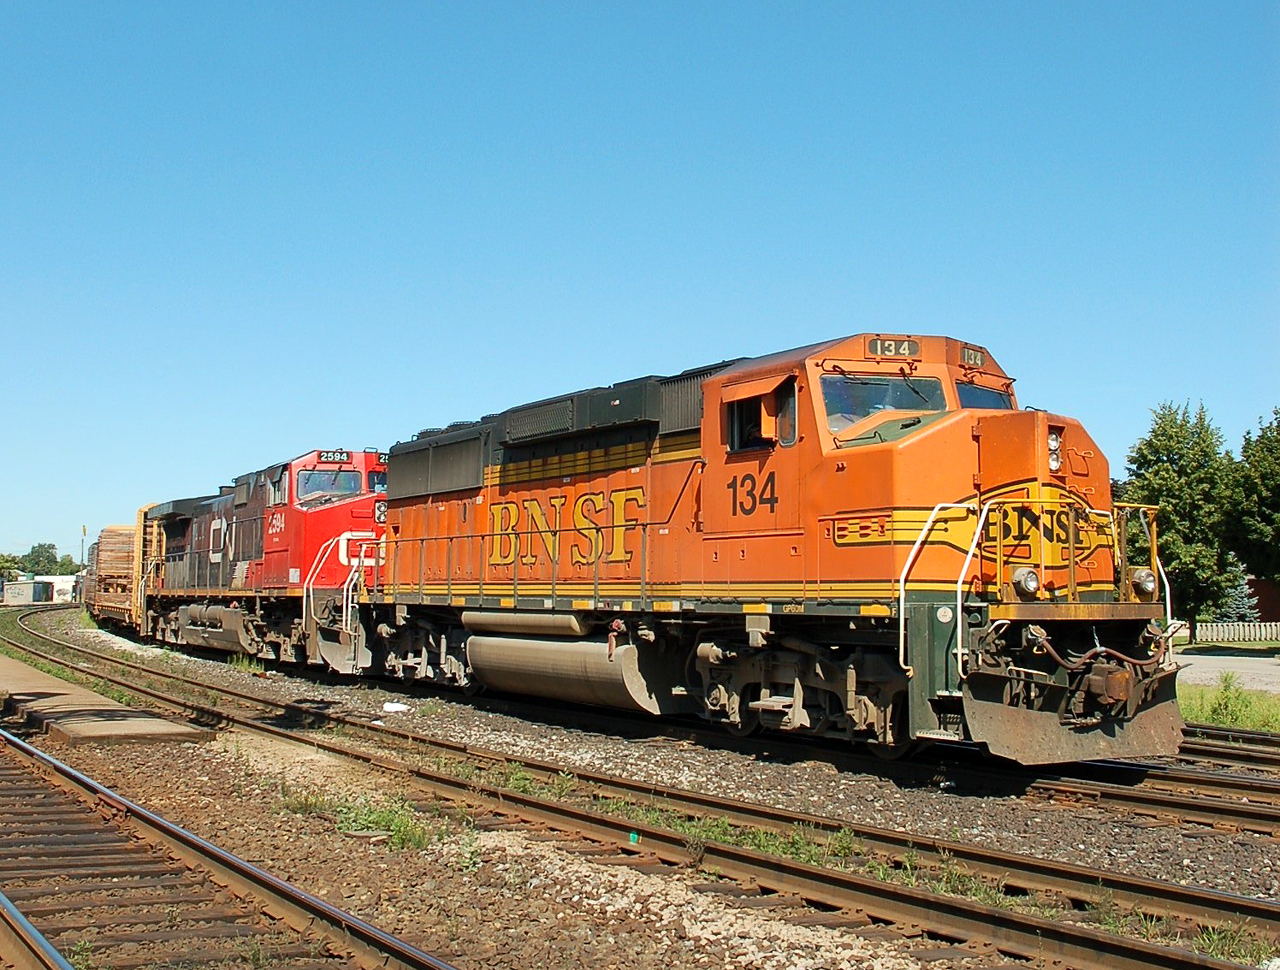 M39491 11 in the process of making a five car lift at Brantford. BNSF 139 and CN 2594 would eventually depart with 87 cars